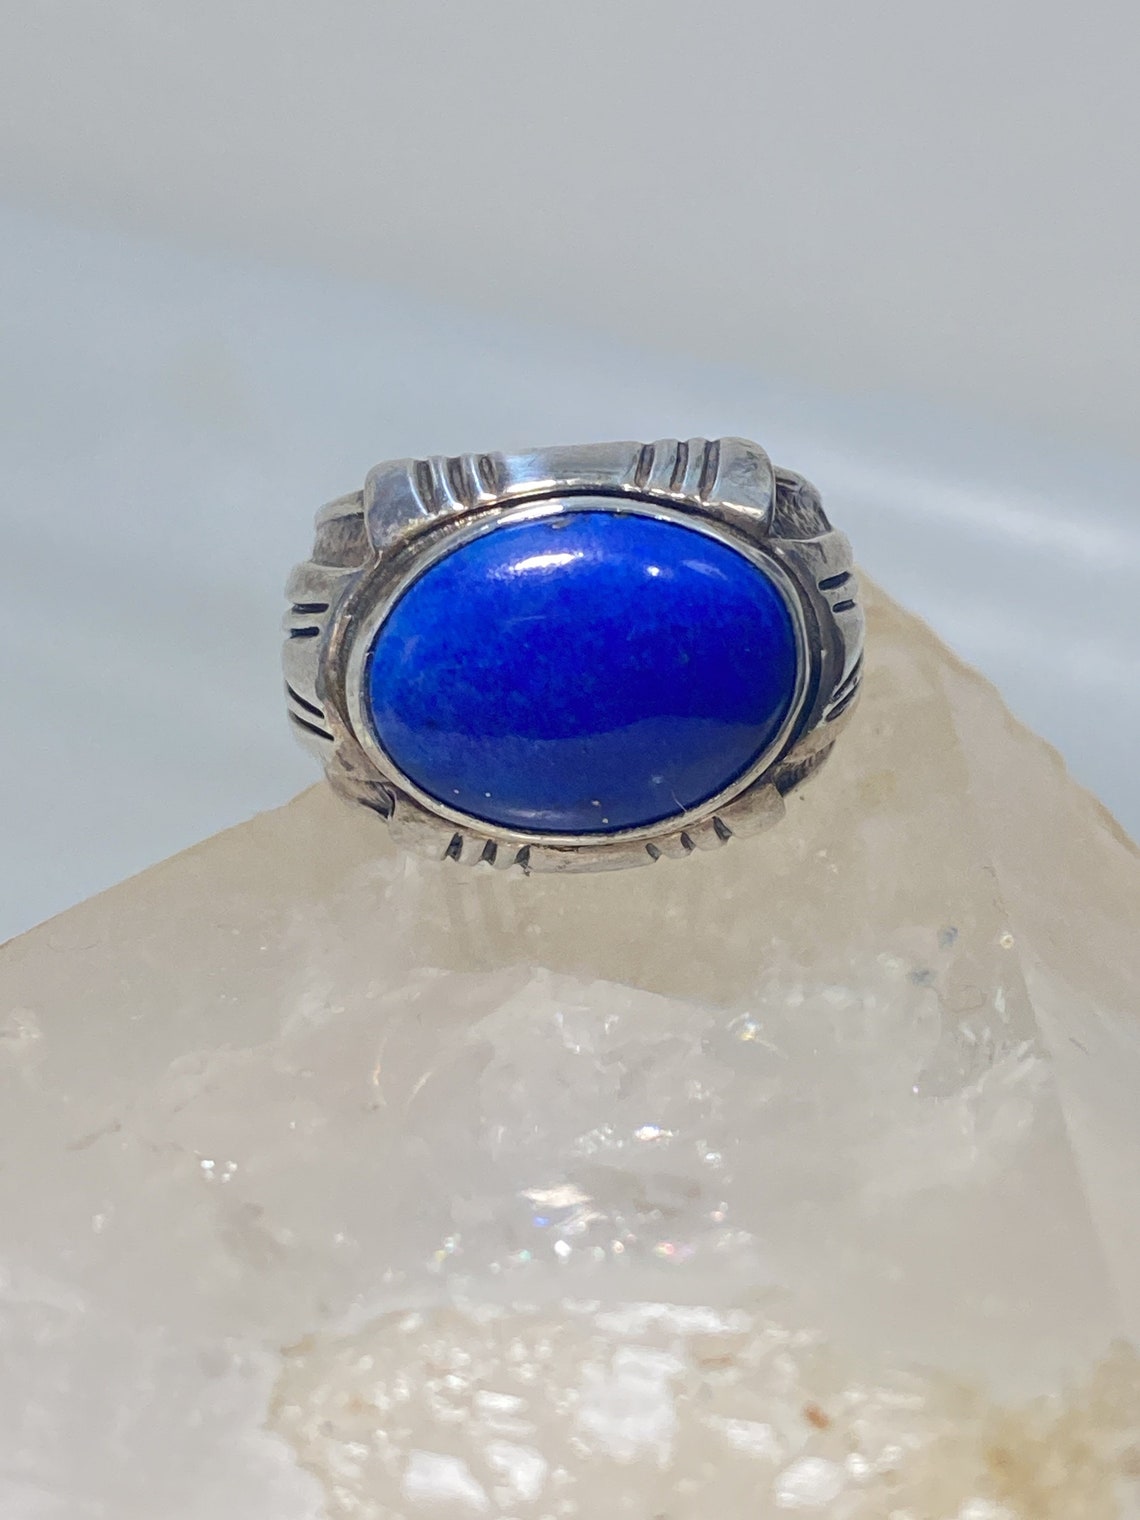 Blue Lapis Ring Solid Band Sterling Silver Women Men Size 8.50 - Etsy